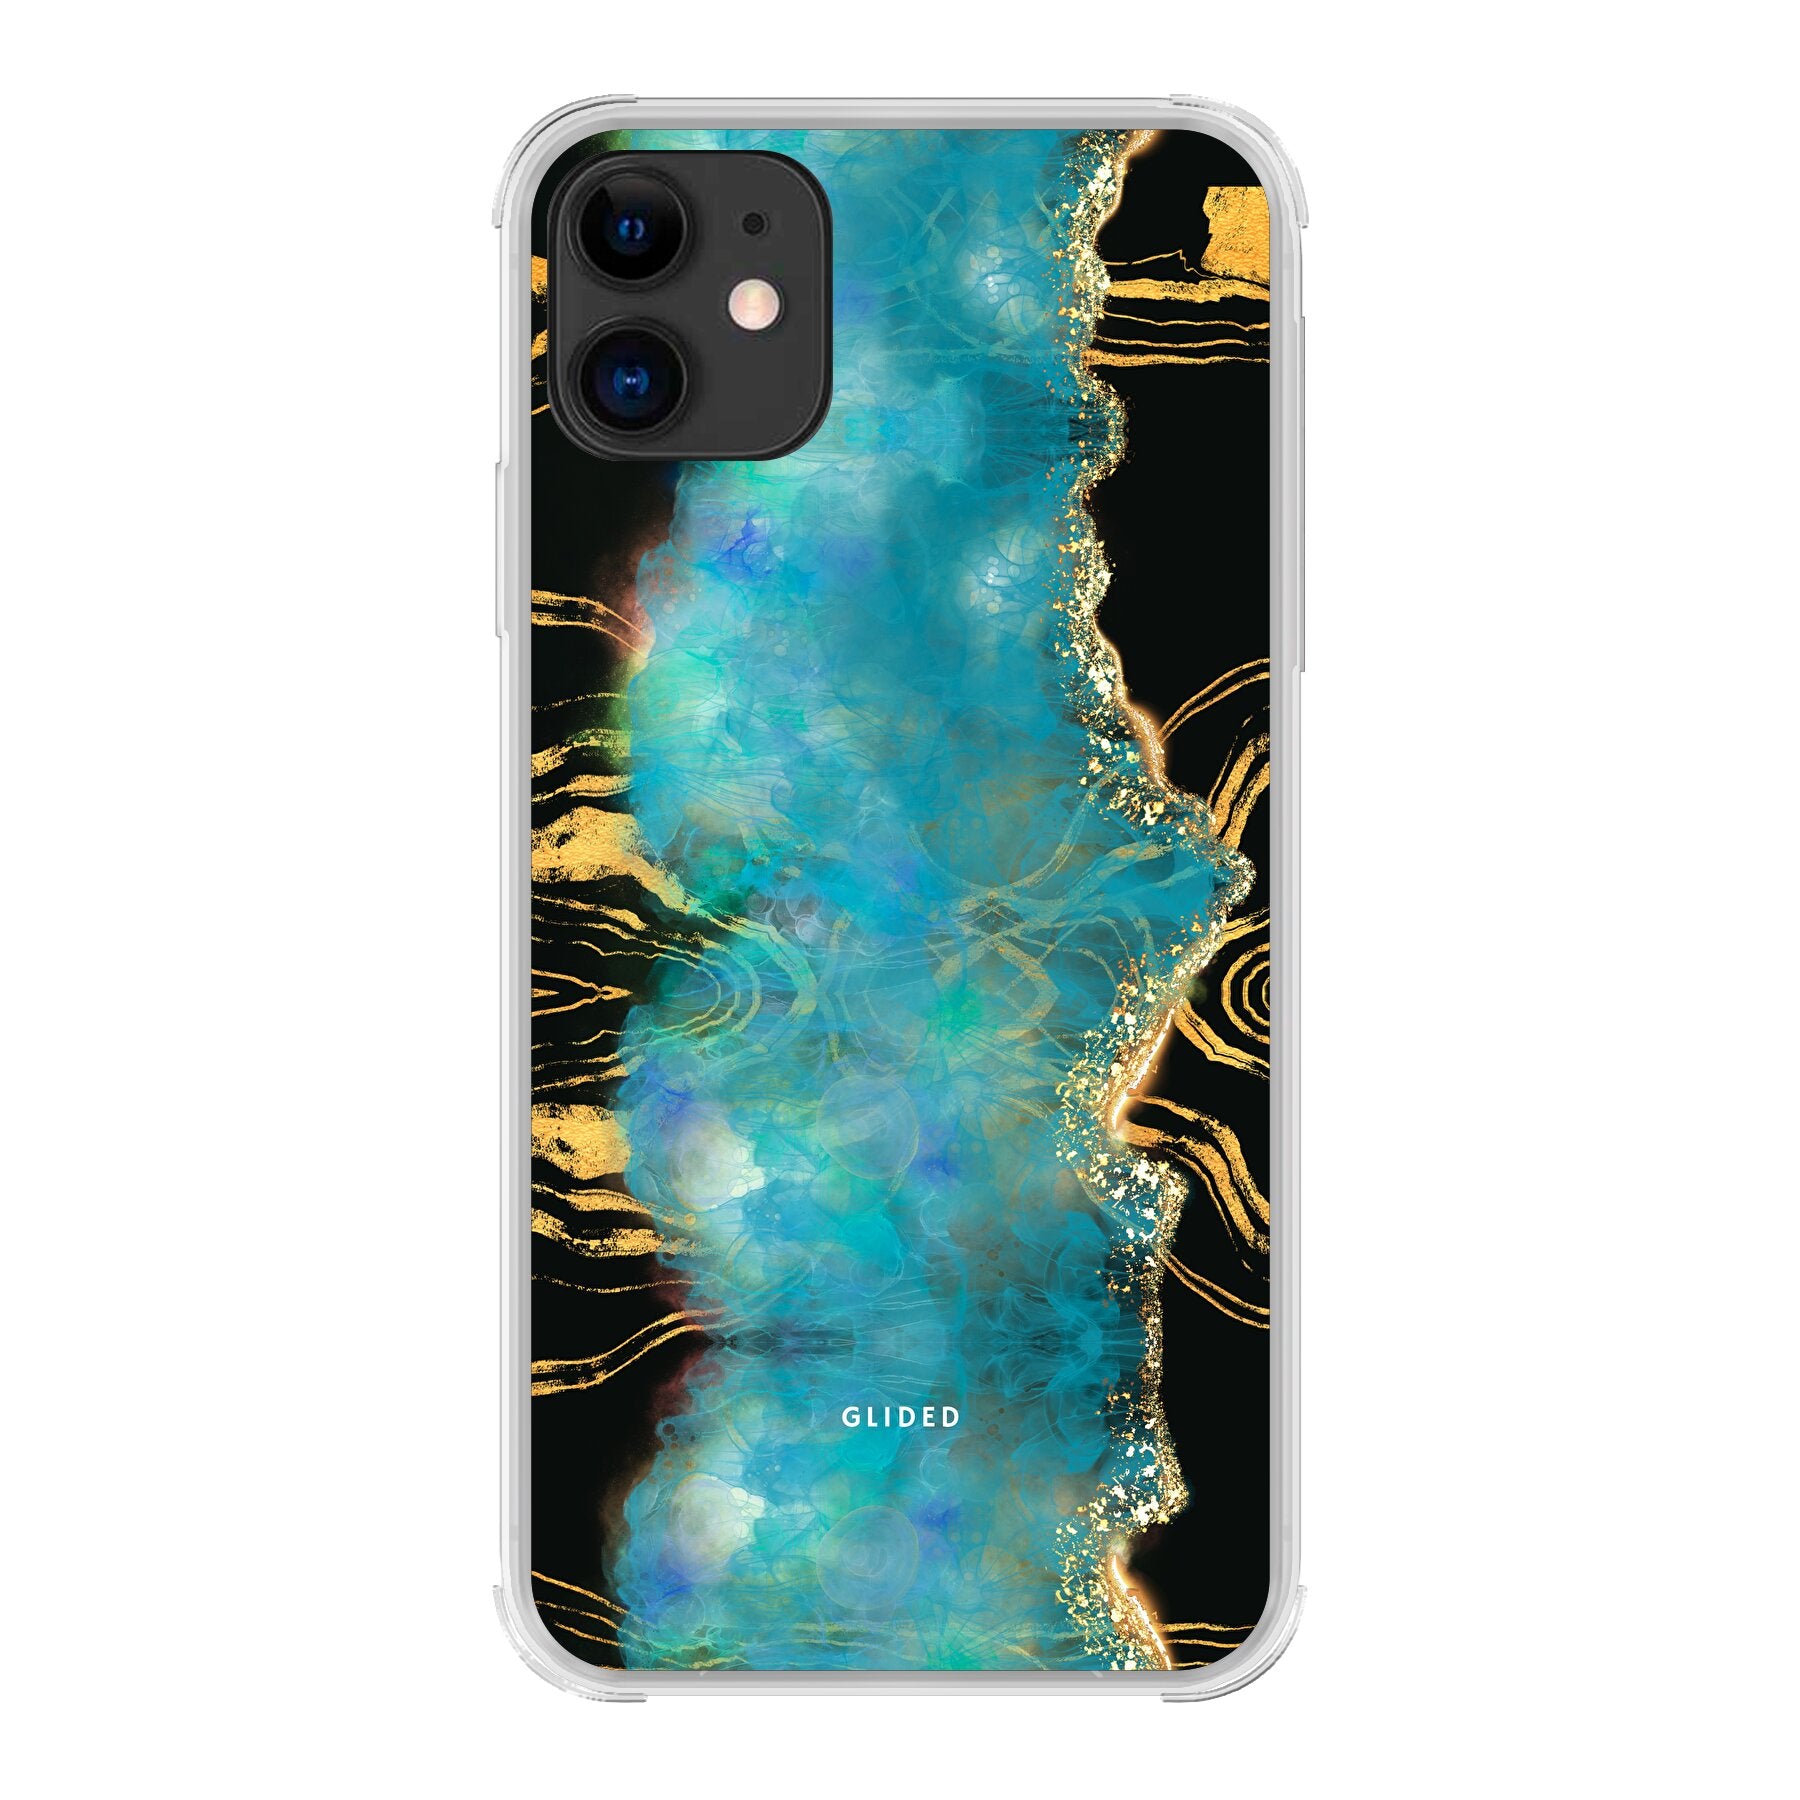 Waterly - iPhone 11 Handyhülle Bumper case